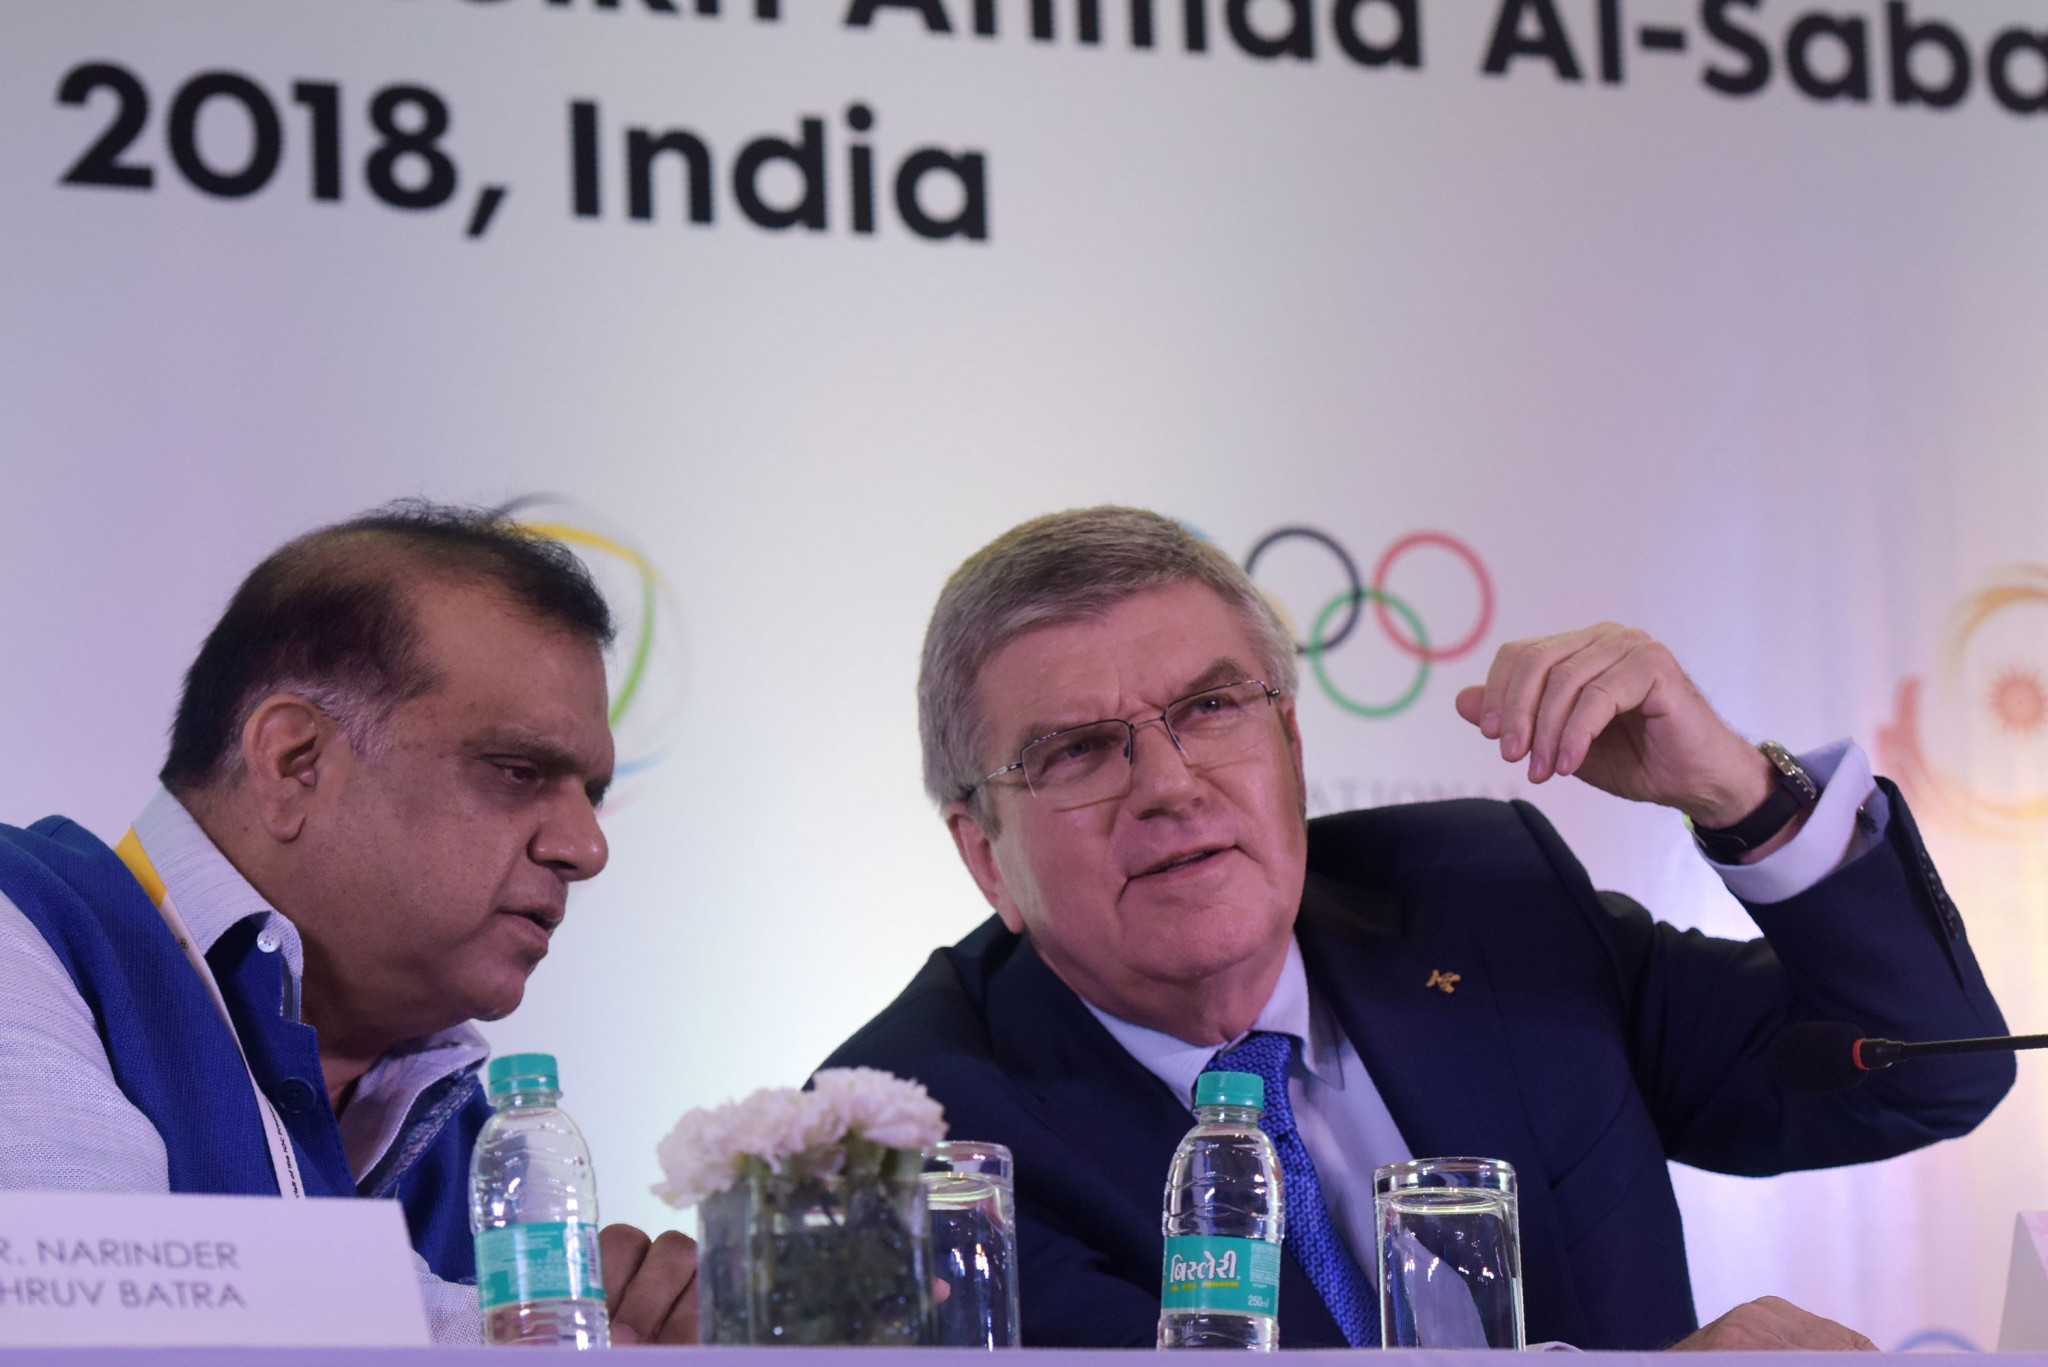 Indian Olympic Committee and International Hockey Federation President Narinder Batra, left, is set to join the IOC after it was announced by Thomas Bach, right, that he was among 10 new members being put forward ©Getty Images